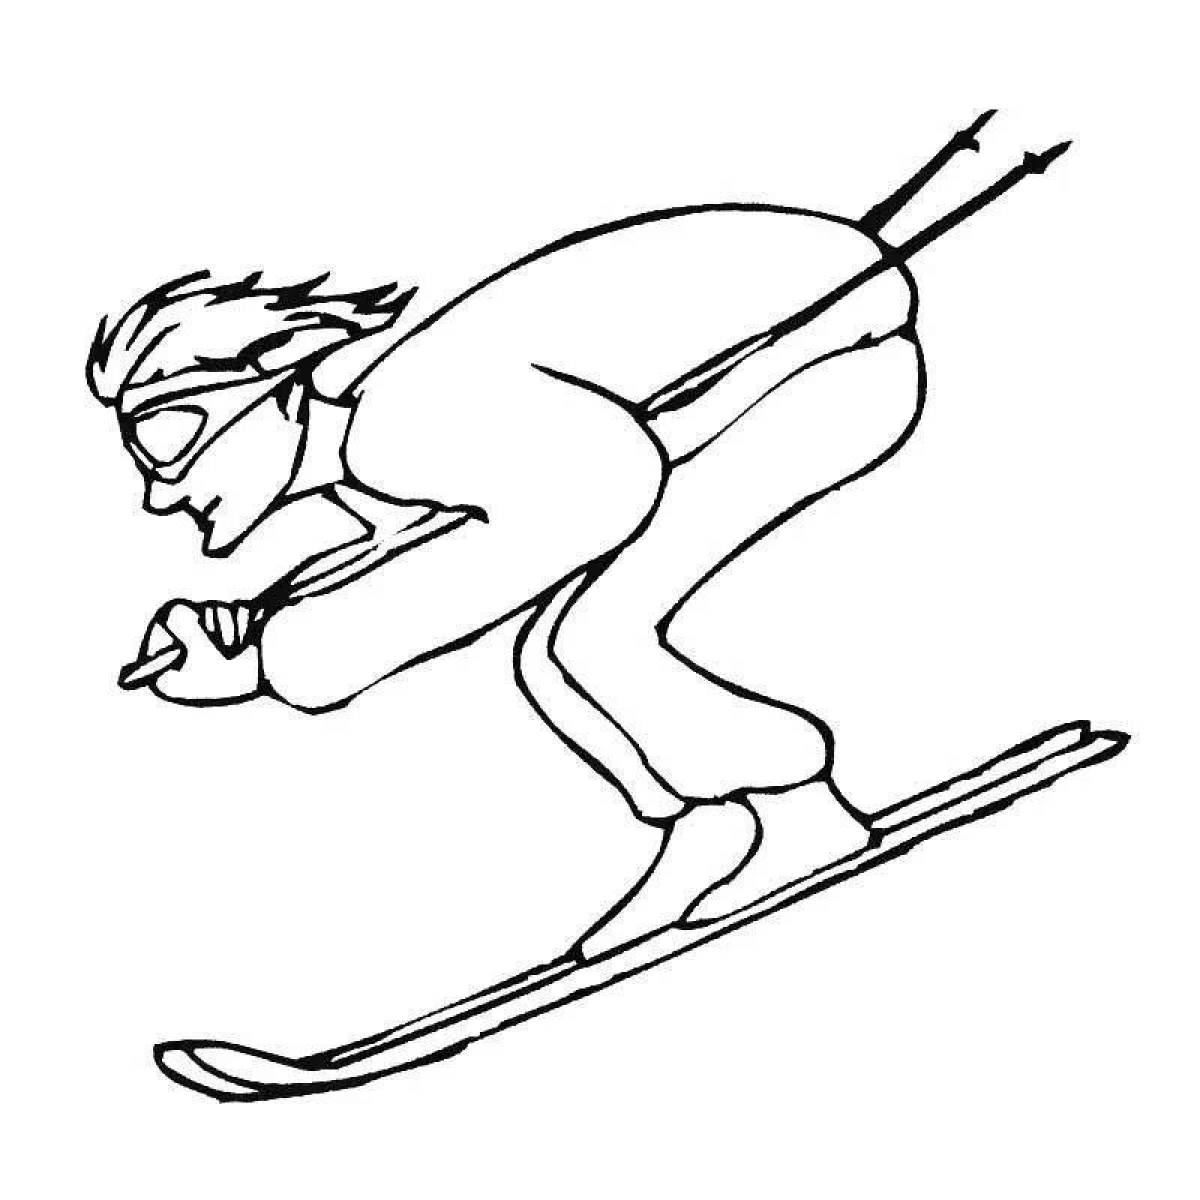 Adorable winter sports coloring page